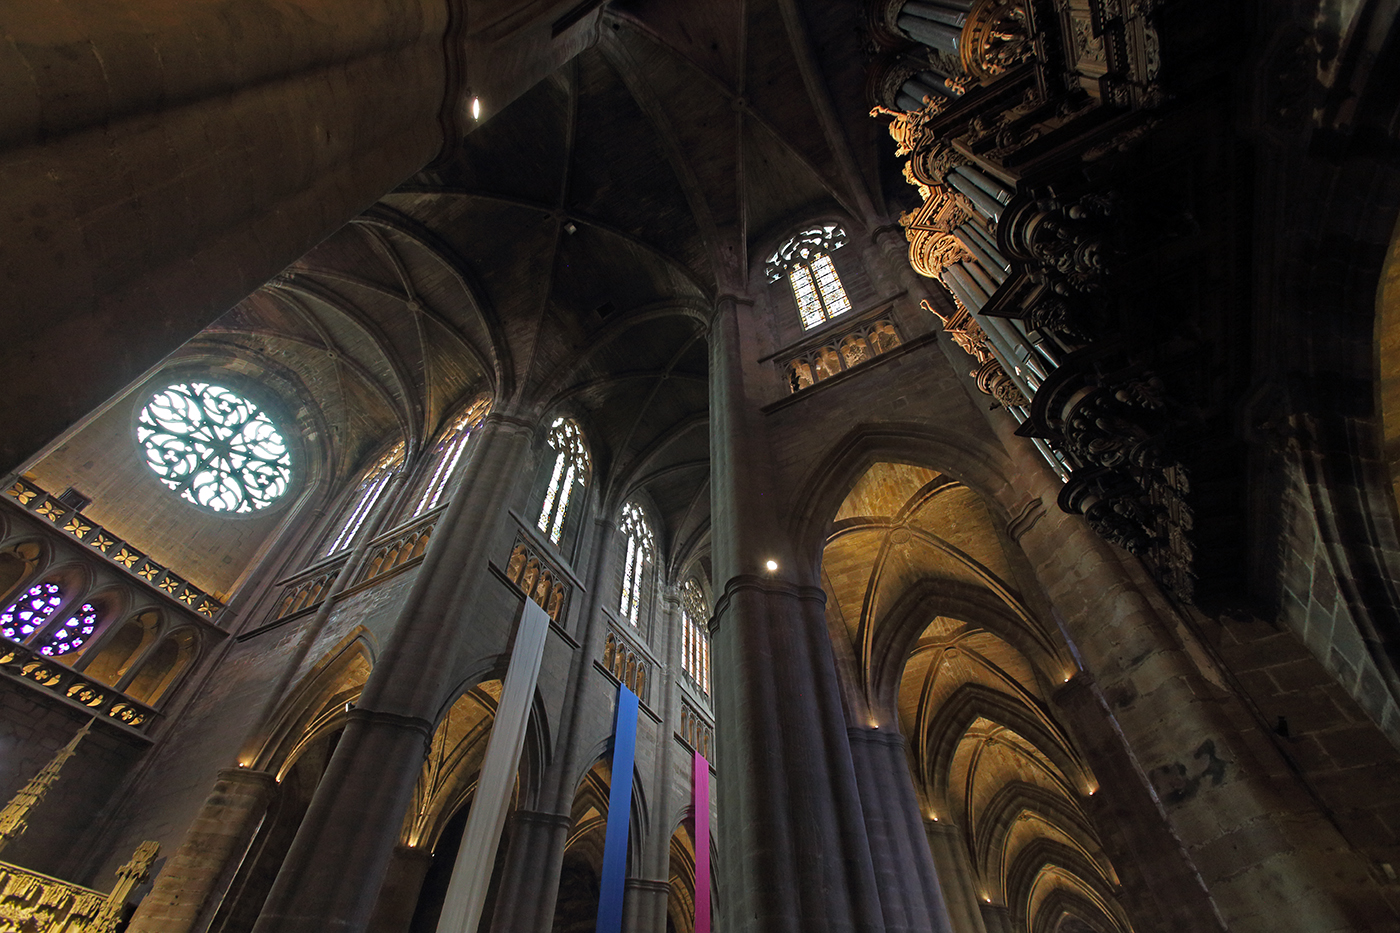  CATHEDRALE_22.JPG